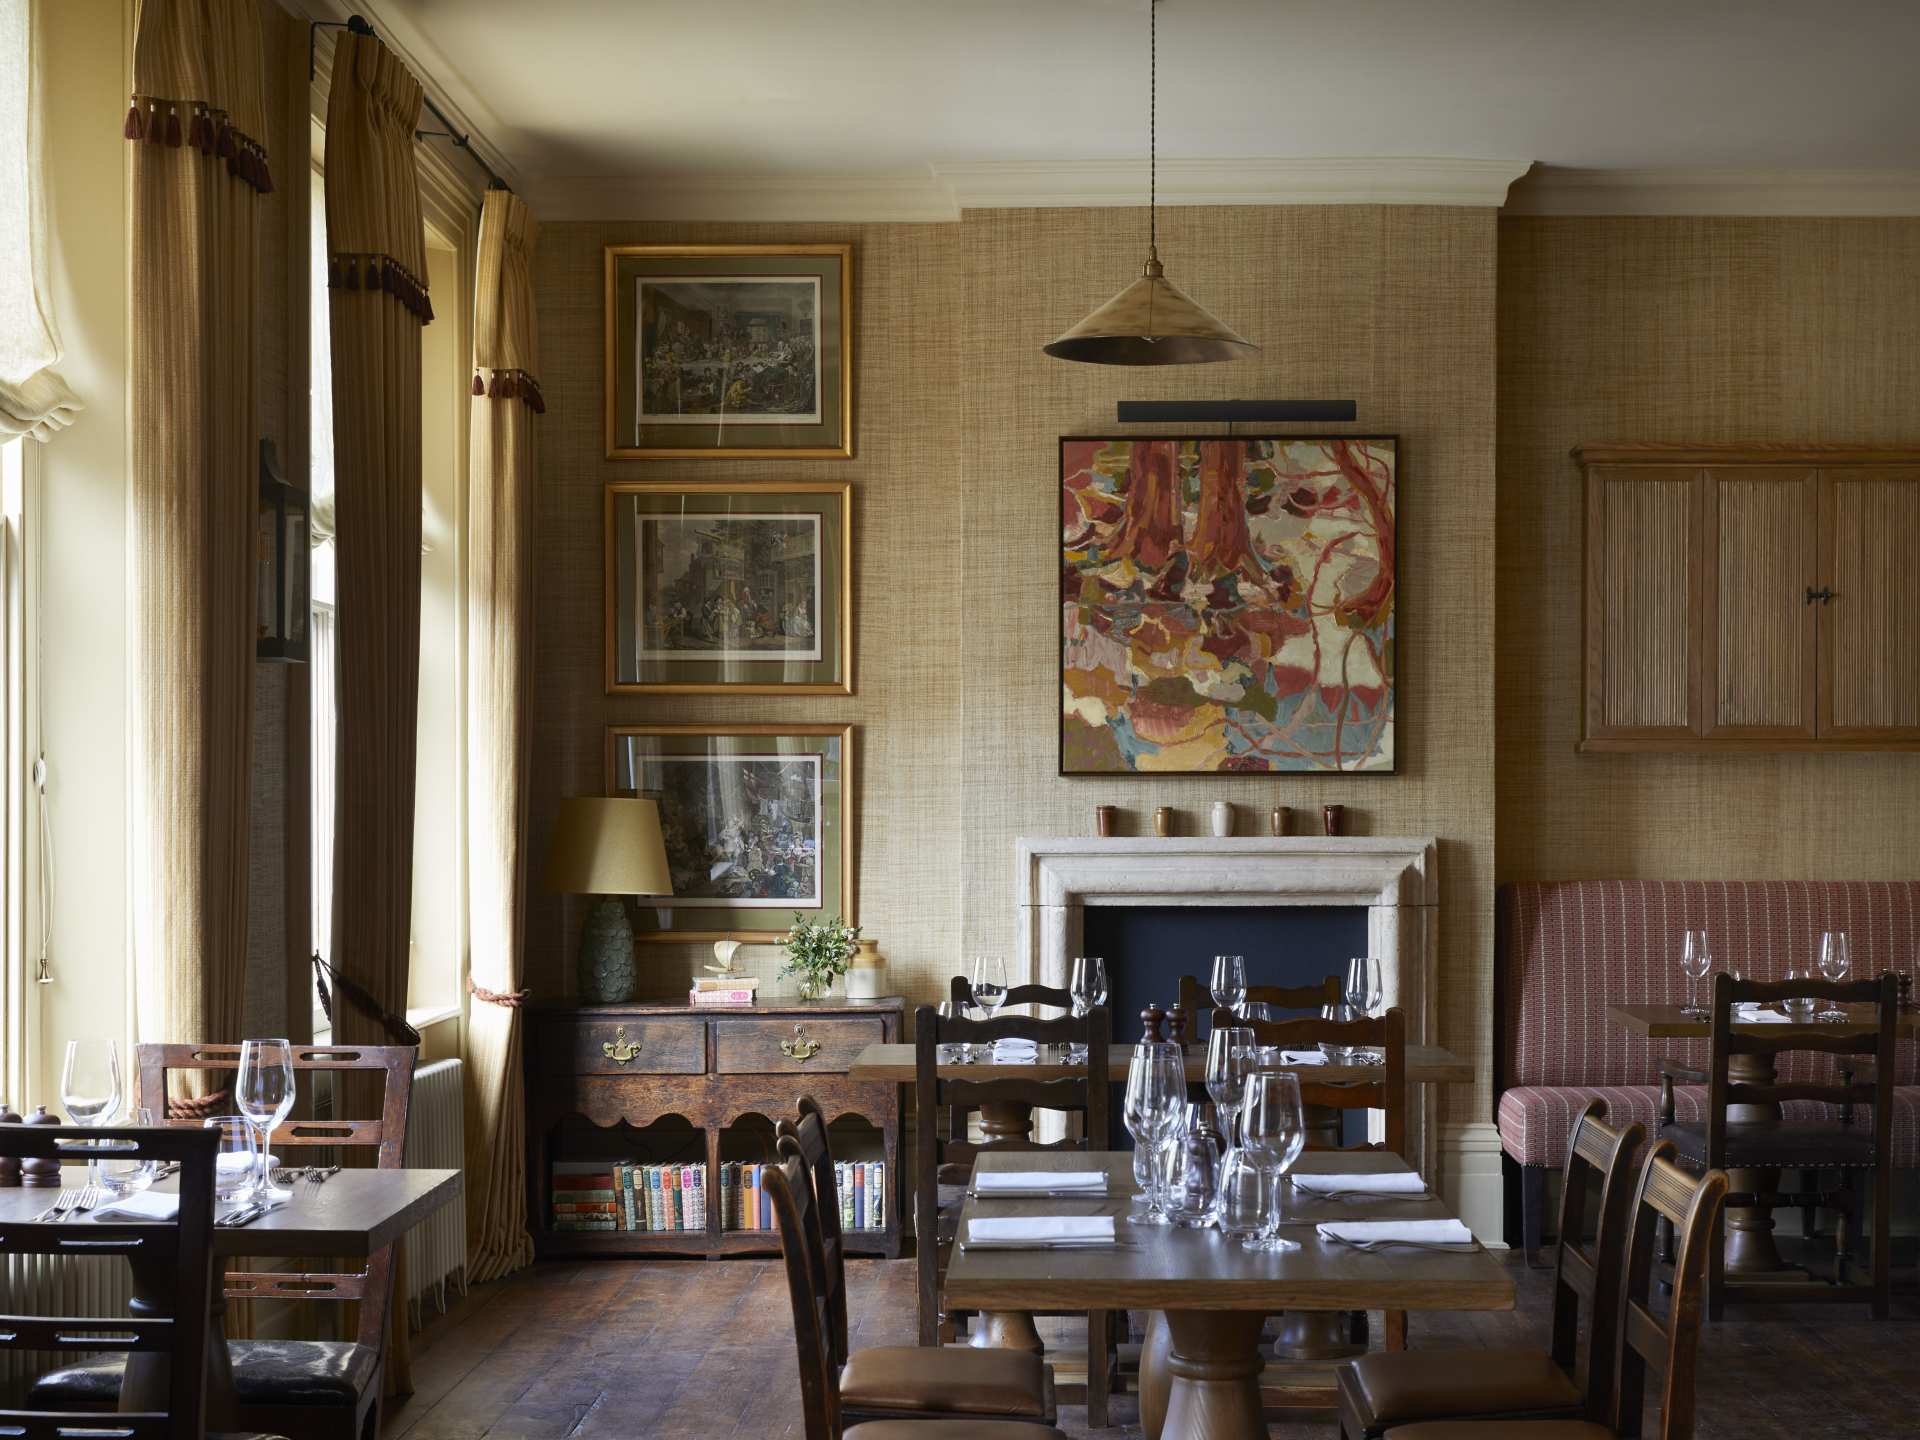 The Walmer Castle dining room